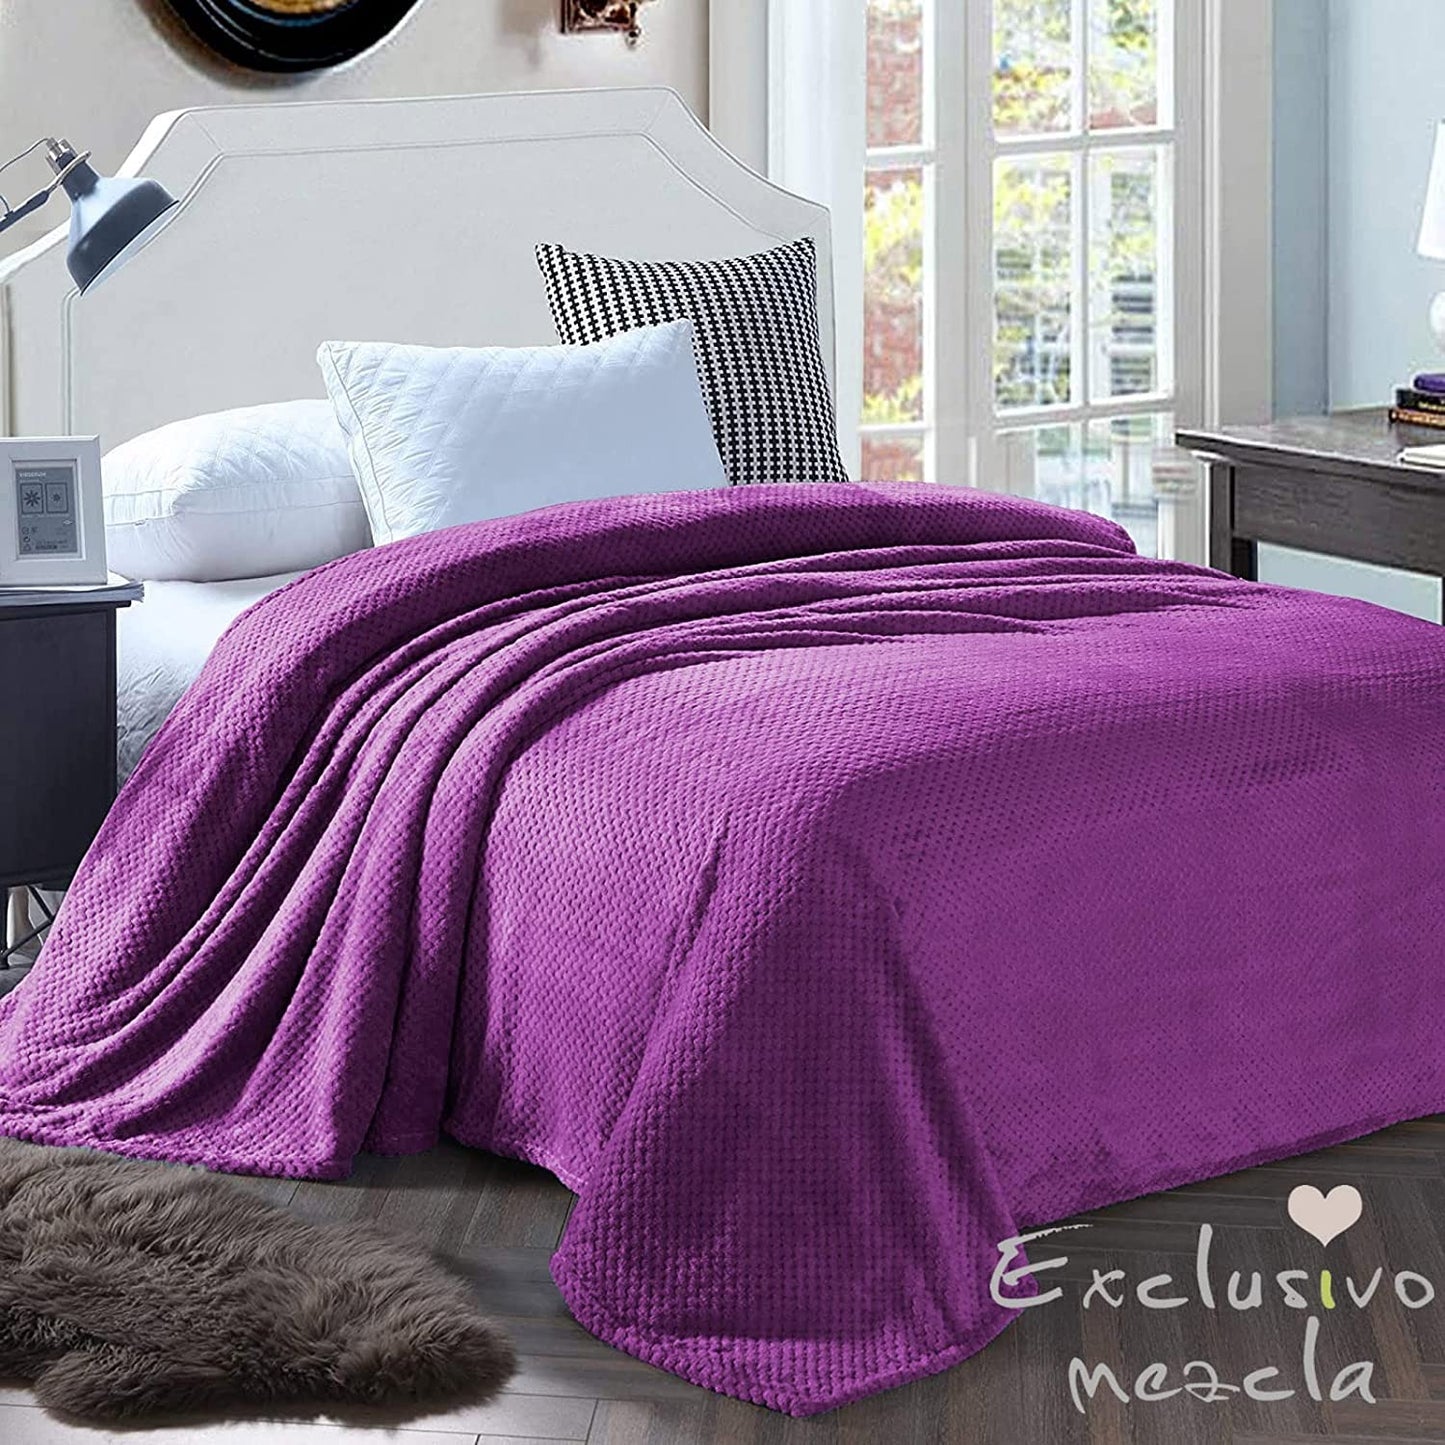 Exclusivo Mezcla Waffle Textured Soft Fleece Blanket, Twin Size Bed Blanket, Cozy Warm and Lightweight (Purple, 90x66 inches)